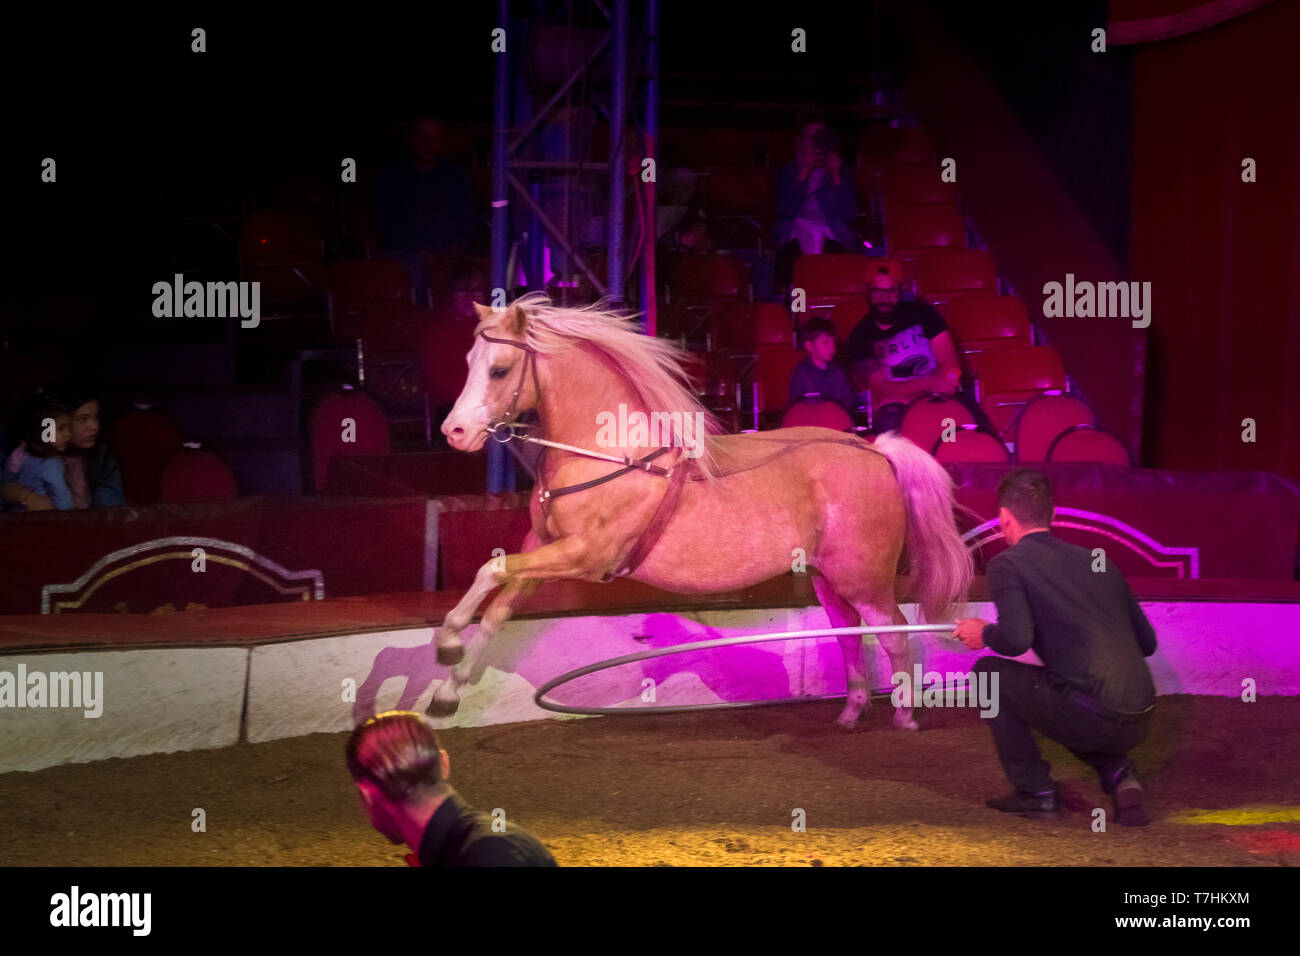 Welsh Pony (Section B) jumping through hoops in a circus ring. Circus Louis Knie Junior, Austria Stock Photo